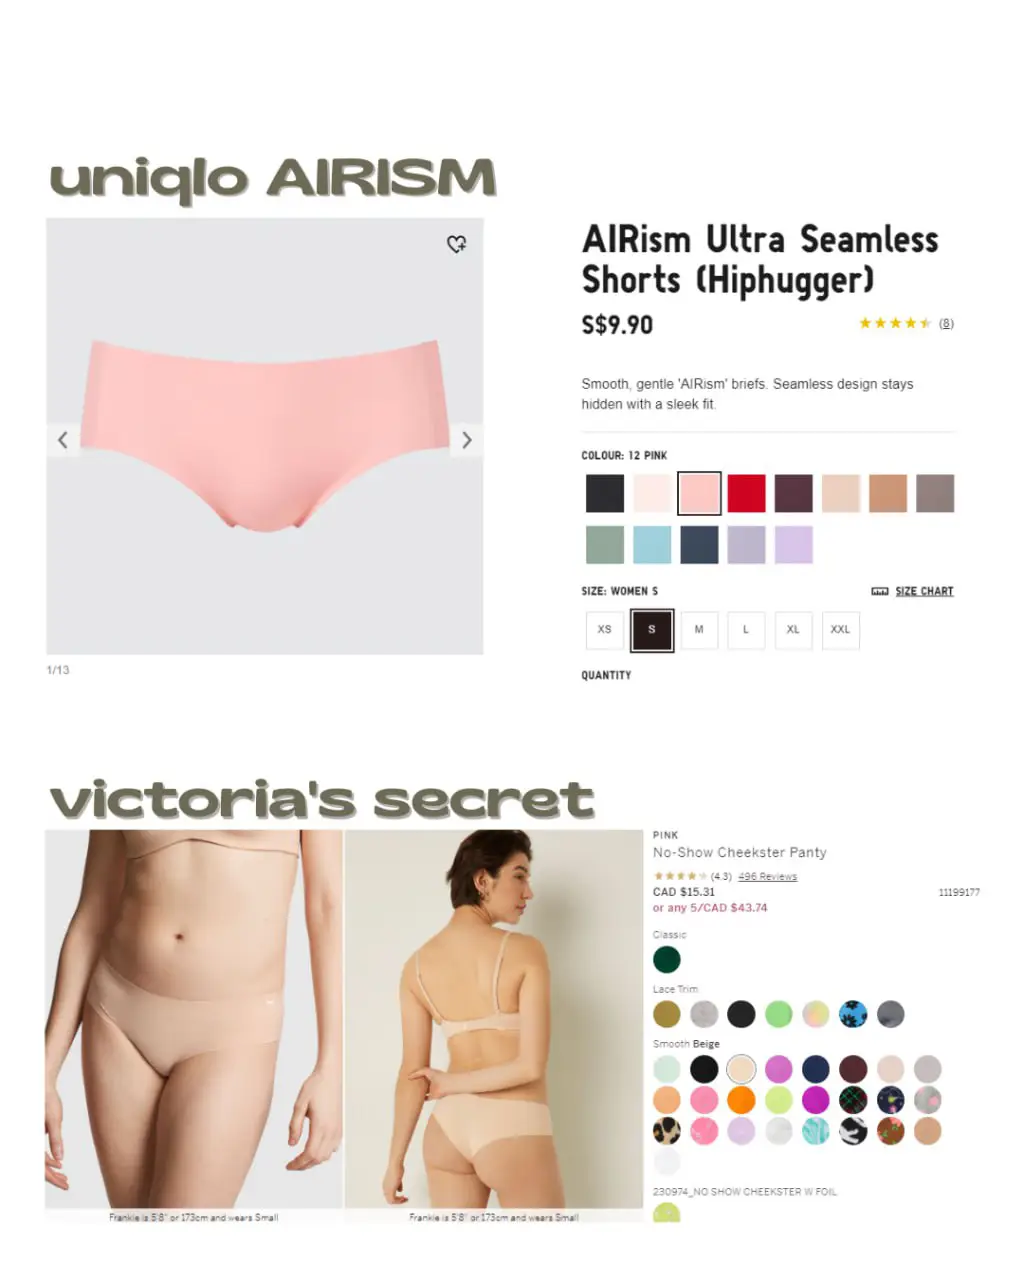 Women's Airism Ultra Seamless High-Rise Briefs with Quick-Drying, Pink, XL